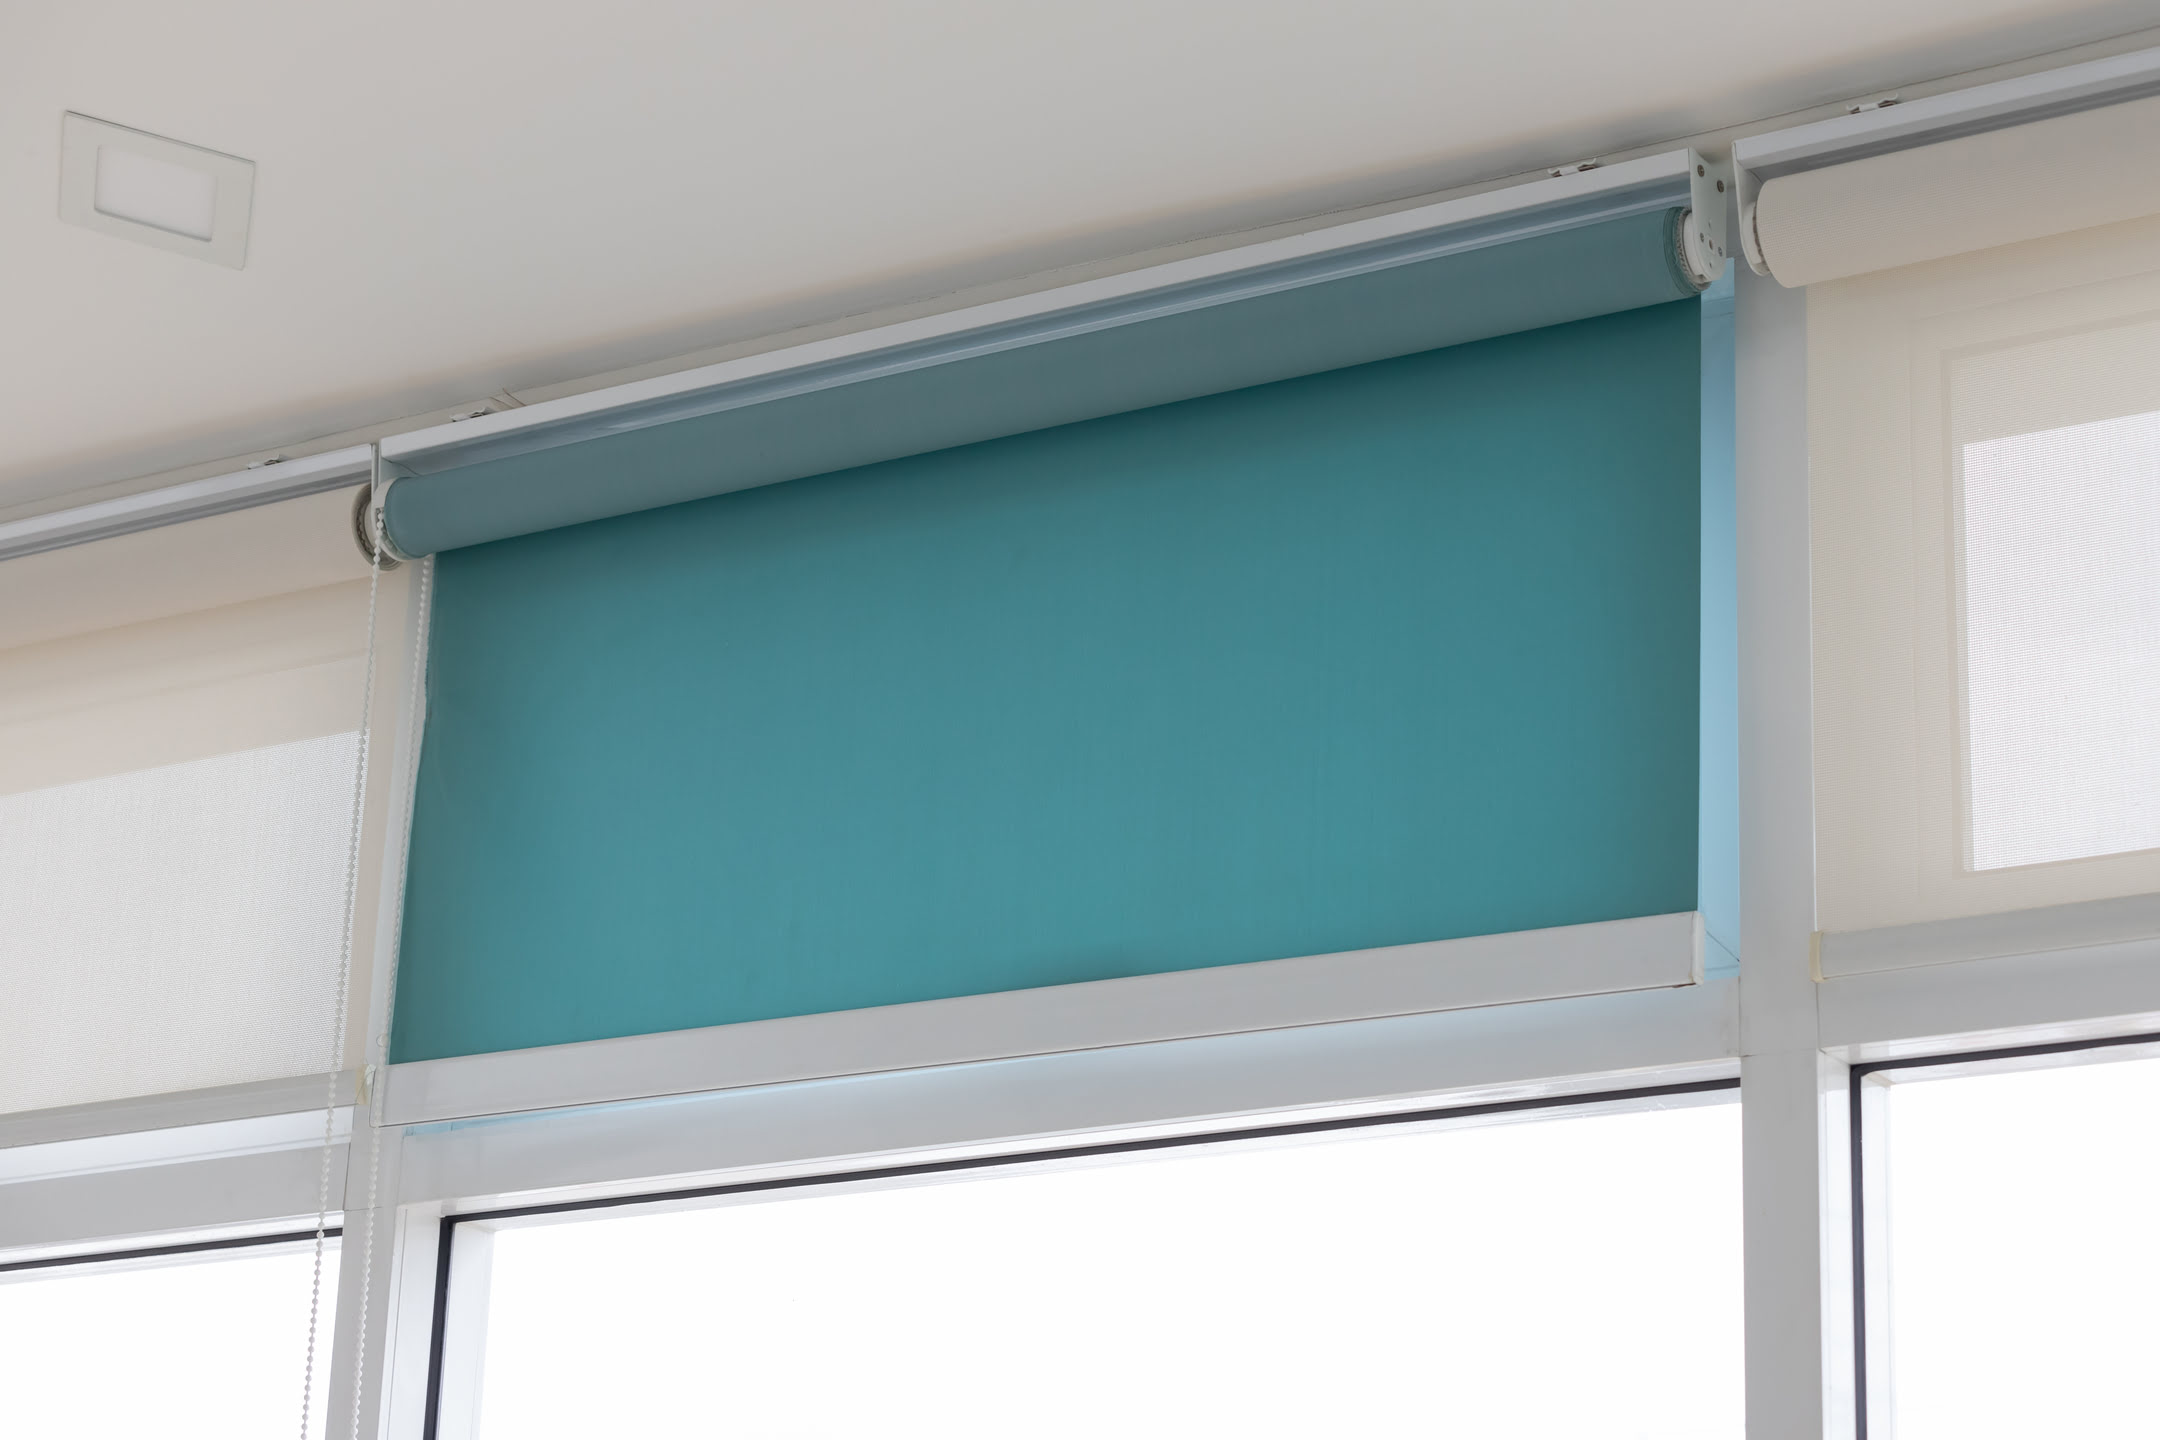 How To Cut Down Roller Blinds